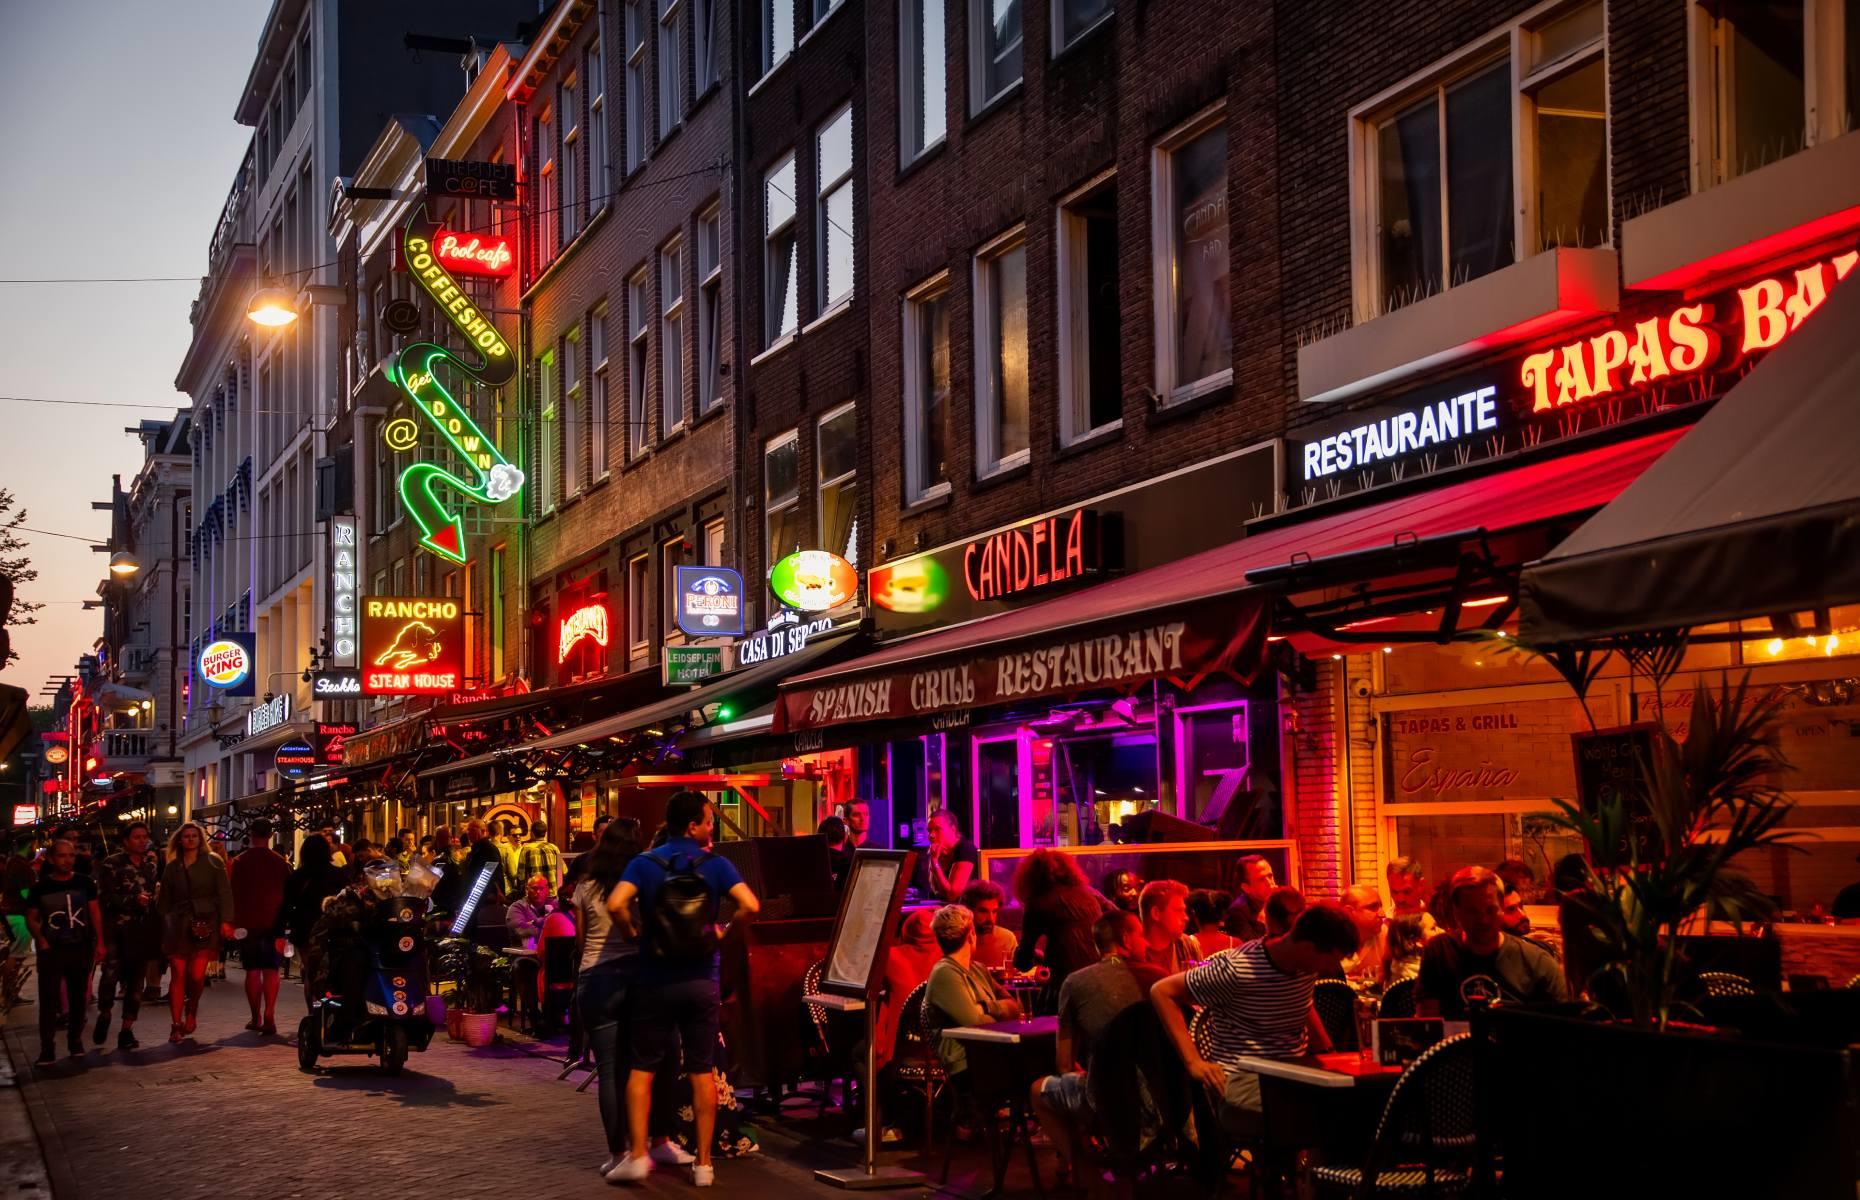 <p>Overtourism has become a major blight in some of Europe’s cities, whose fatal flaw is their aesthetic beauty and party-loving nightlife districts. But enough is enough, says Amsterdam, which will increase its tourist tax in 2024 in line with restrictions the city recently placed on cruise ships. The hike will mean Amsterdam breaking its own record for the highest tourist tax in Europe – maybe even the world. Spanish destinations like Seville, Mallorca and Barcelona are also clamping down on rowdy visitors eliciting antisocial behaviour.</p>